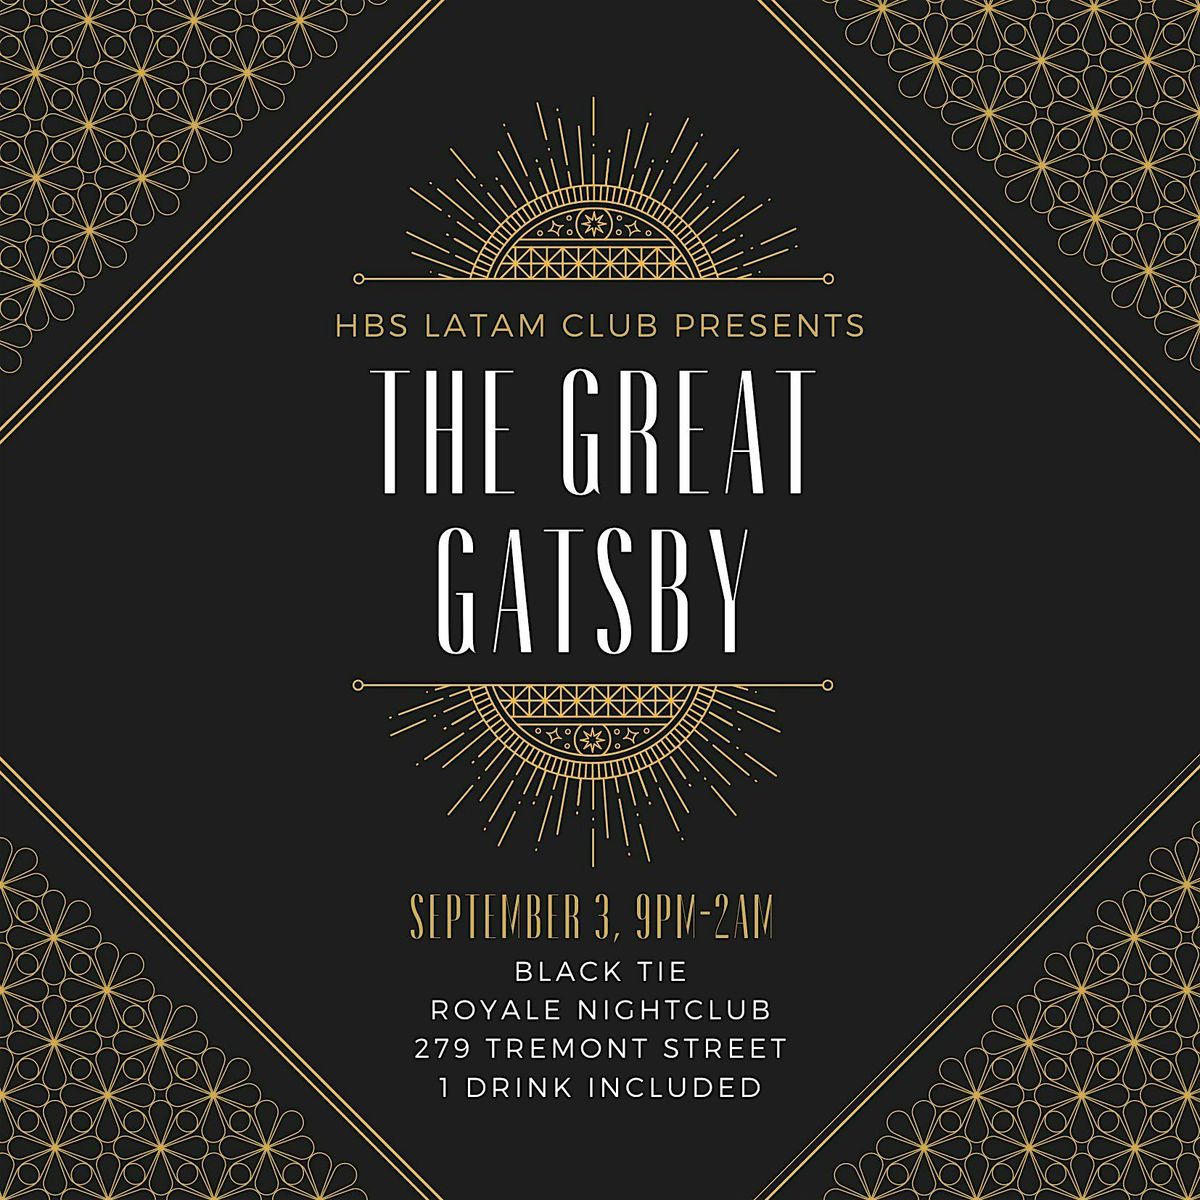 The Great Gatsby Party by HBS Latam Club